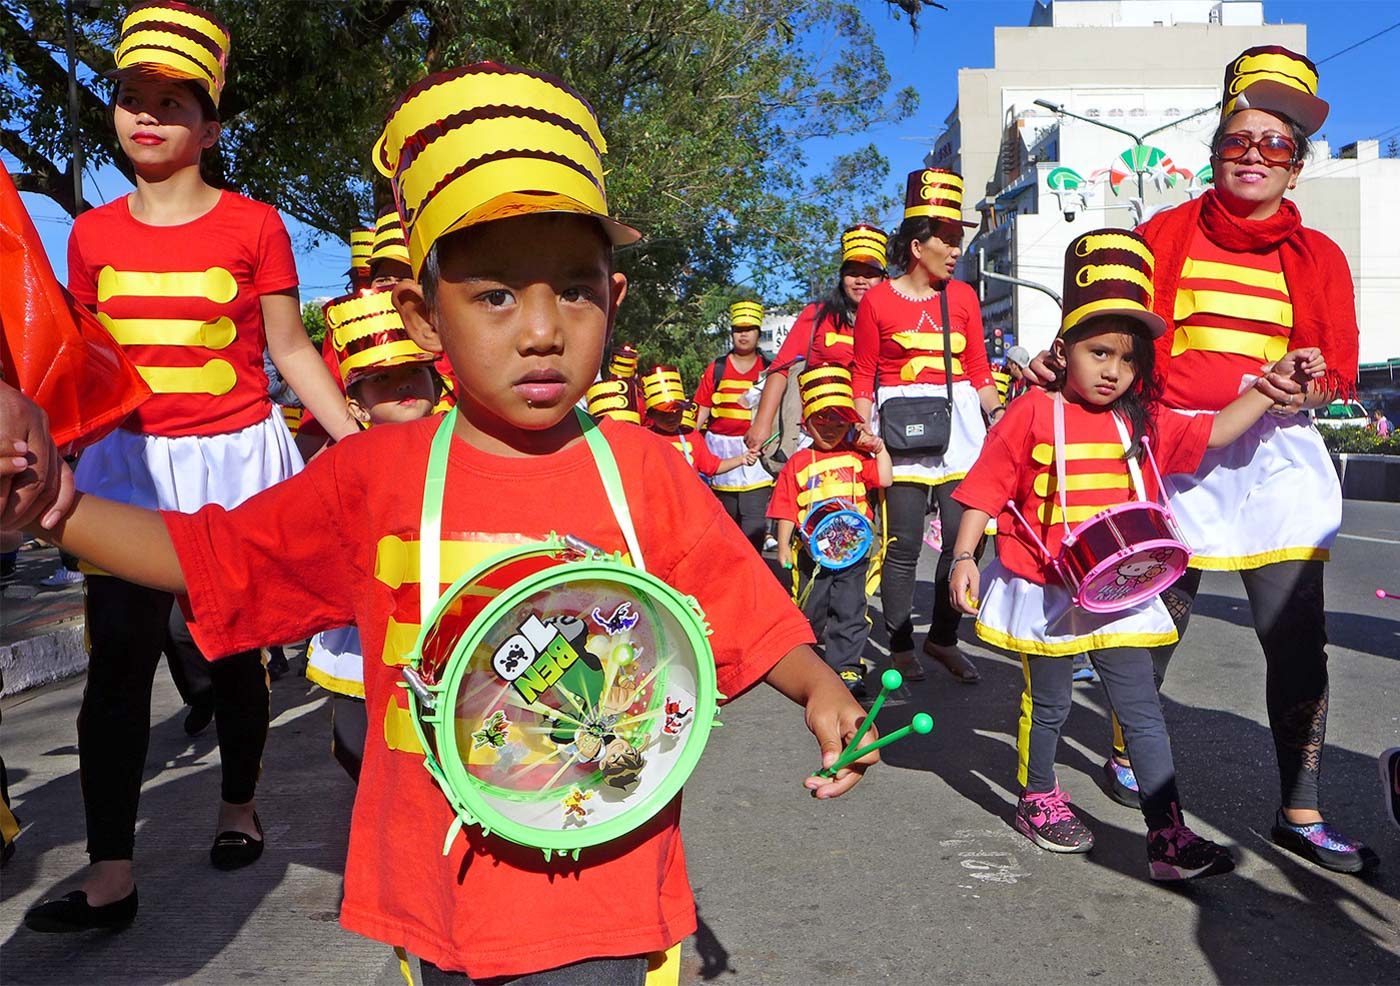 LITTLE DRUMMERS. Kids and parents dress up as little drummer boys and girls at the event 